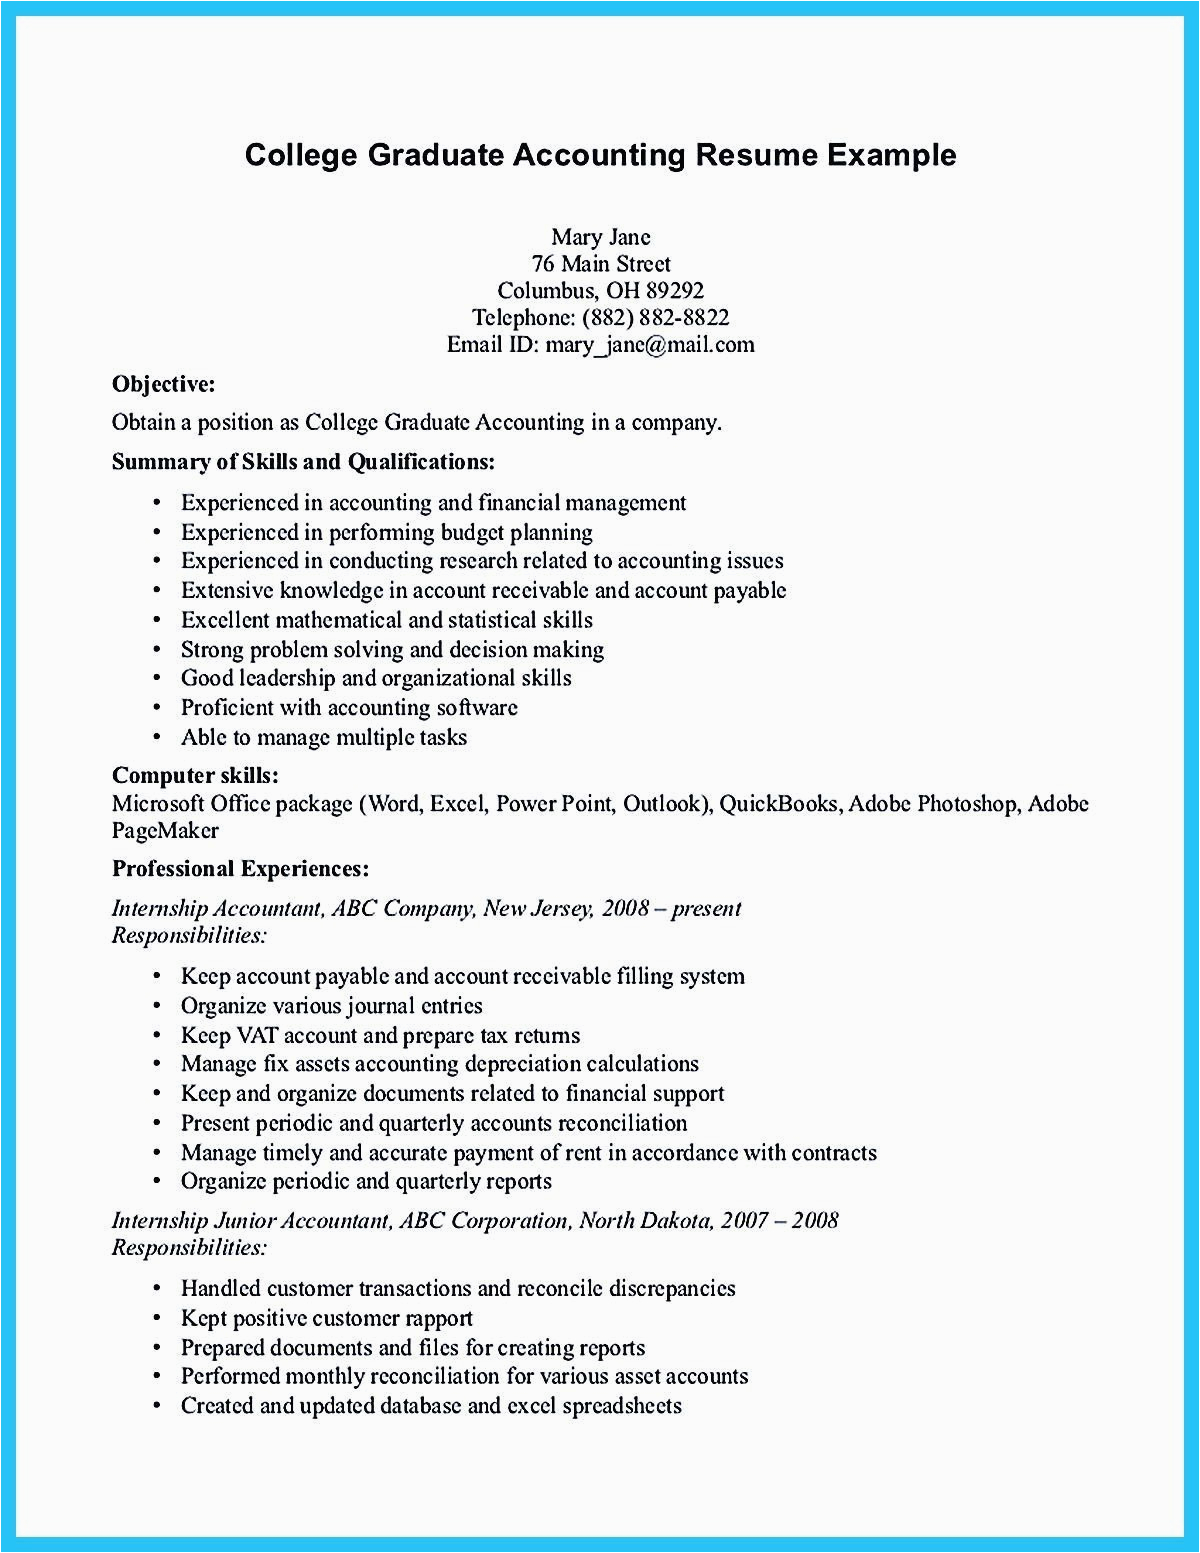 Sample Resume Fresh Graduate Accounting Student Pin On Resume Examples